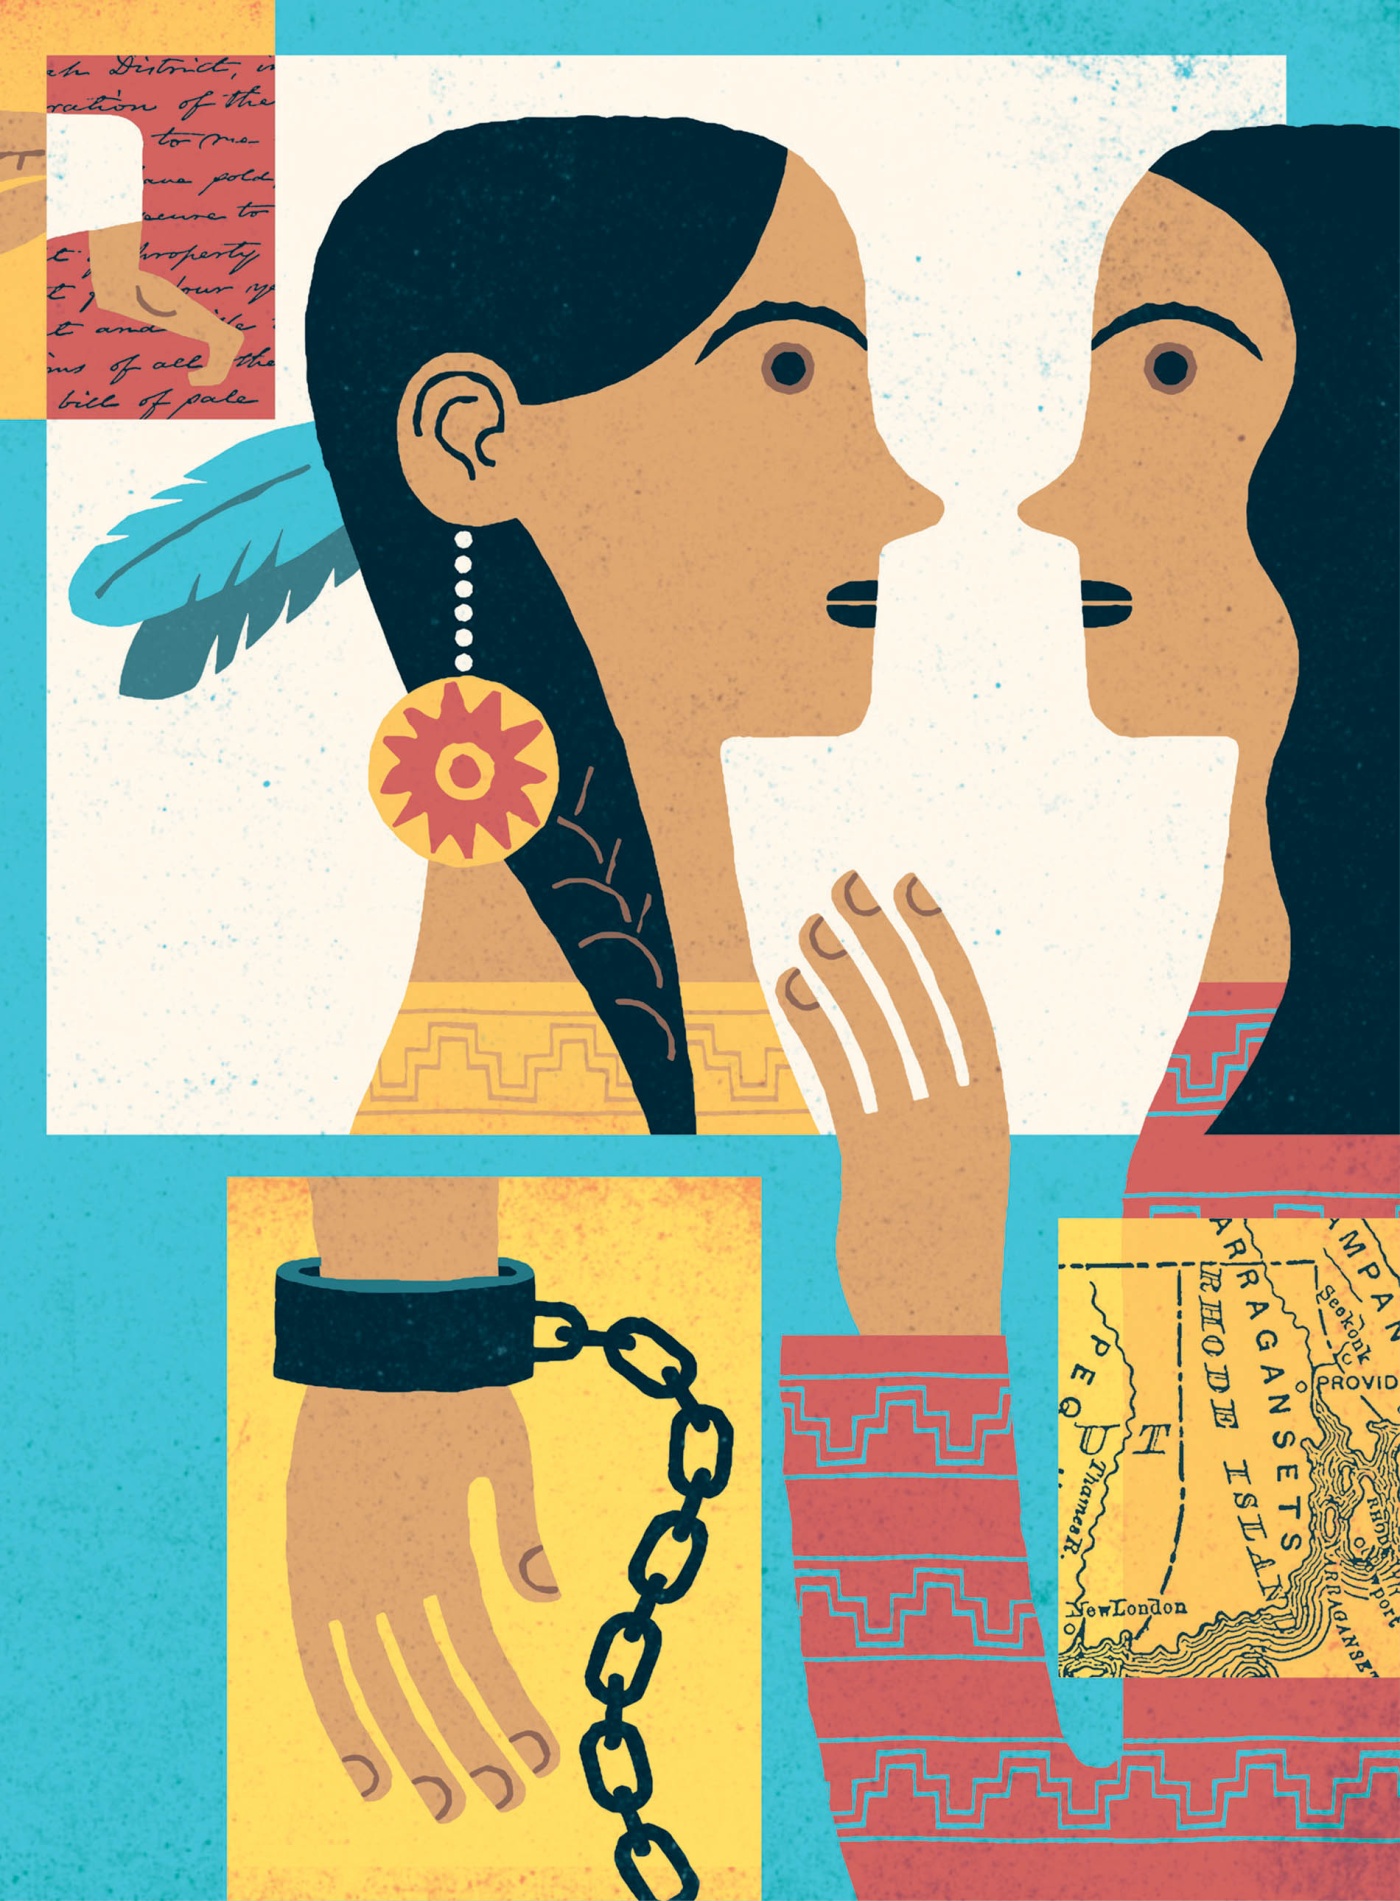 Illustration by Tim Cook of two Native Americans looking at one another, a wrist in handcuffs, and a map of Narragansett territory in R.I.